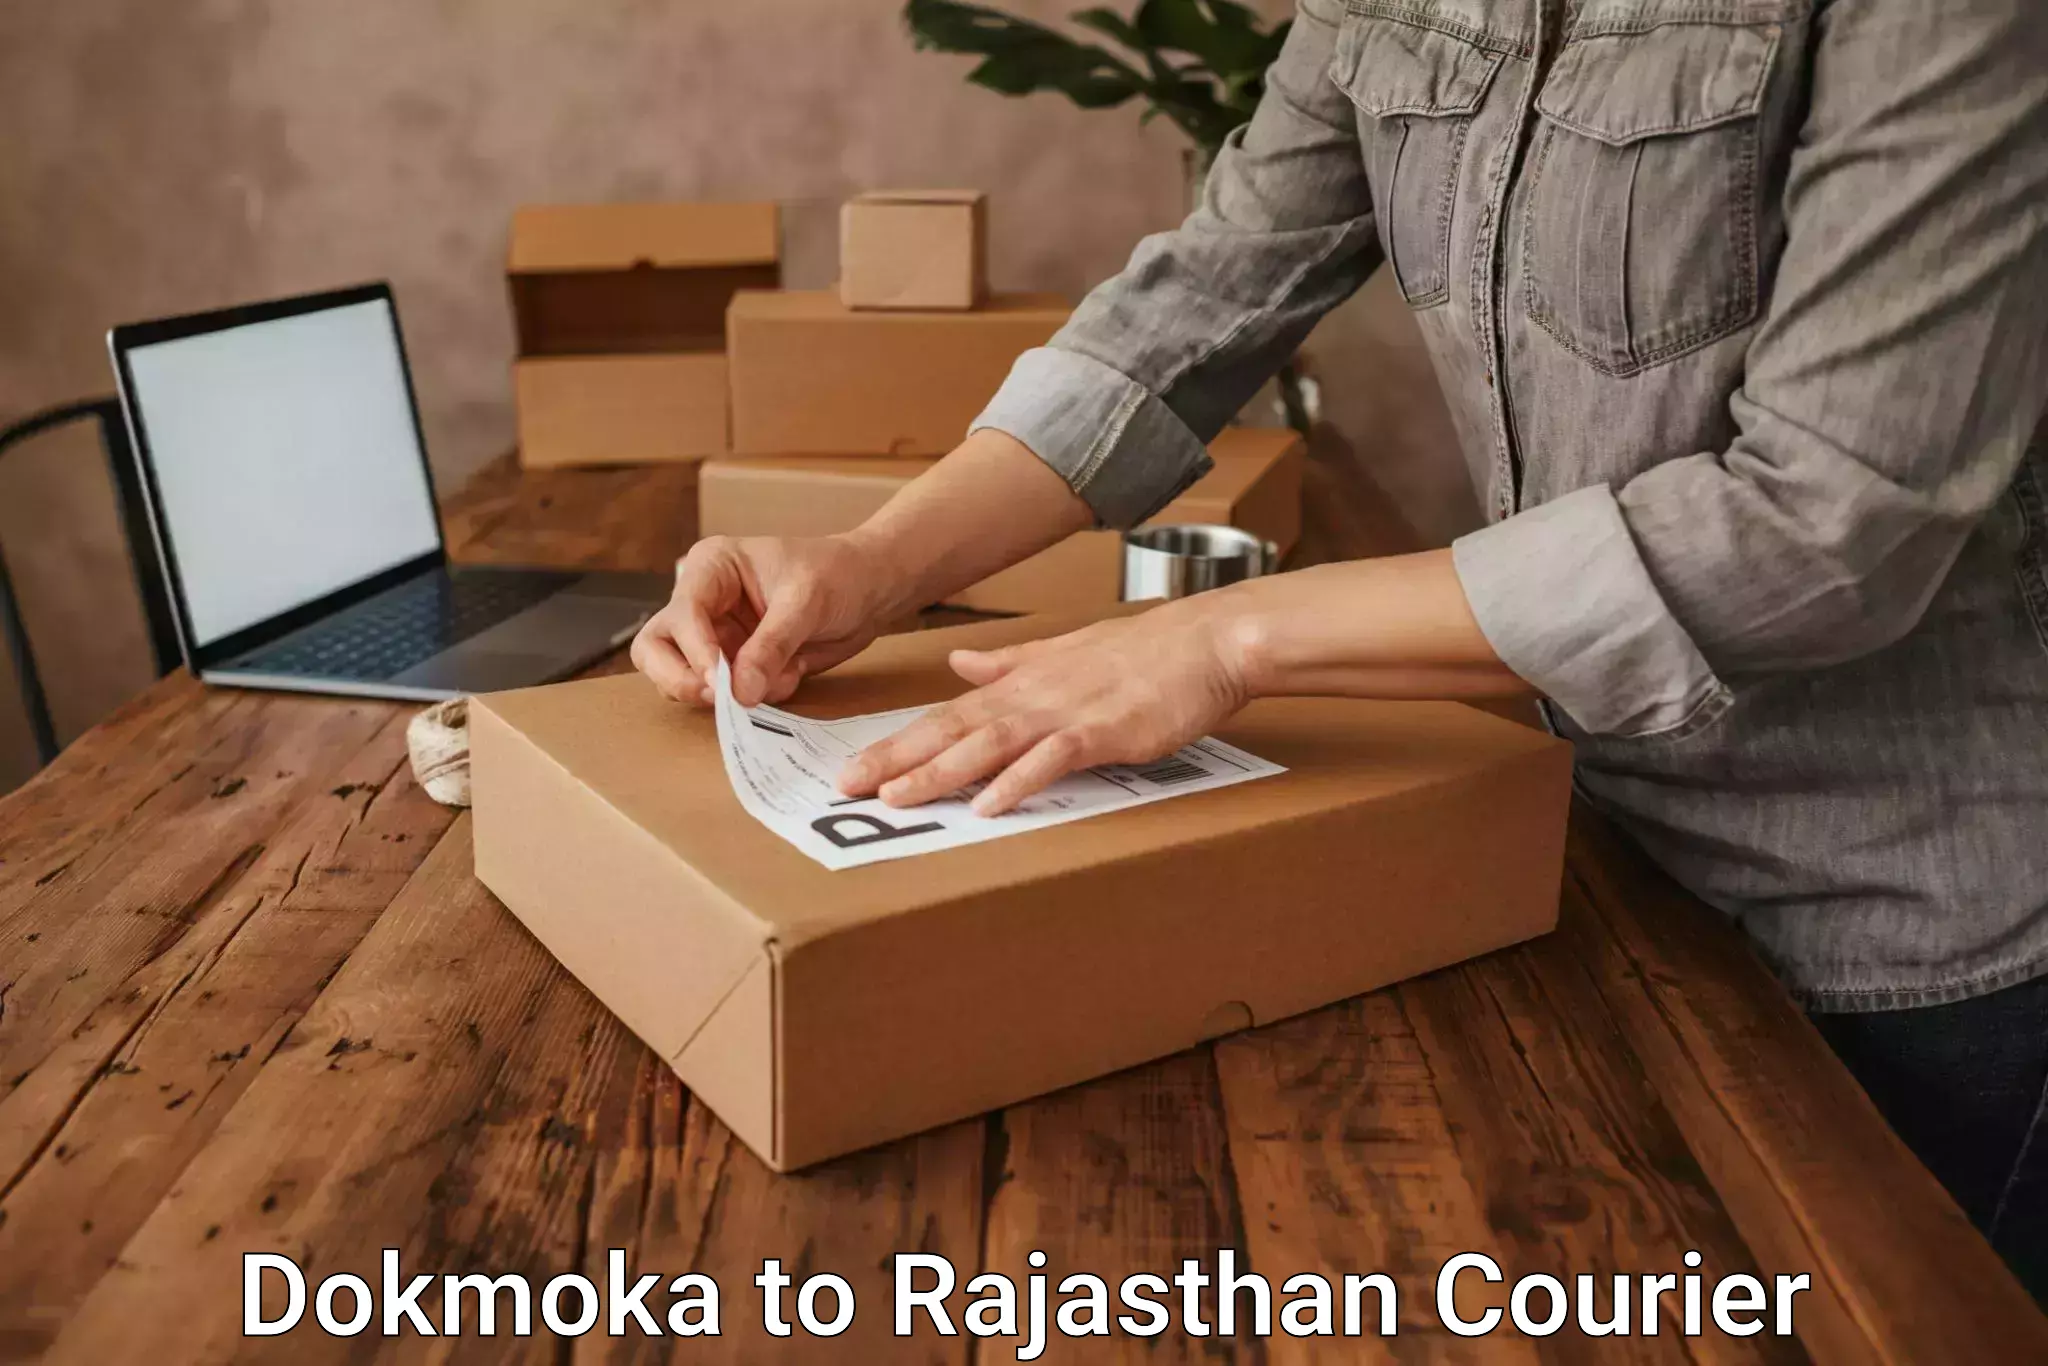 Courier insurance in Dokmoka to Rajasthan